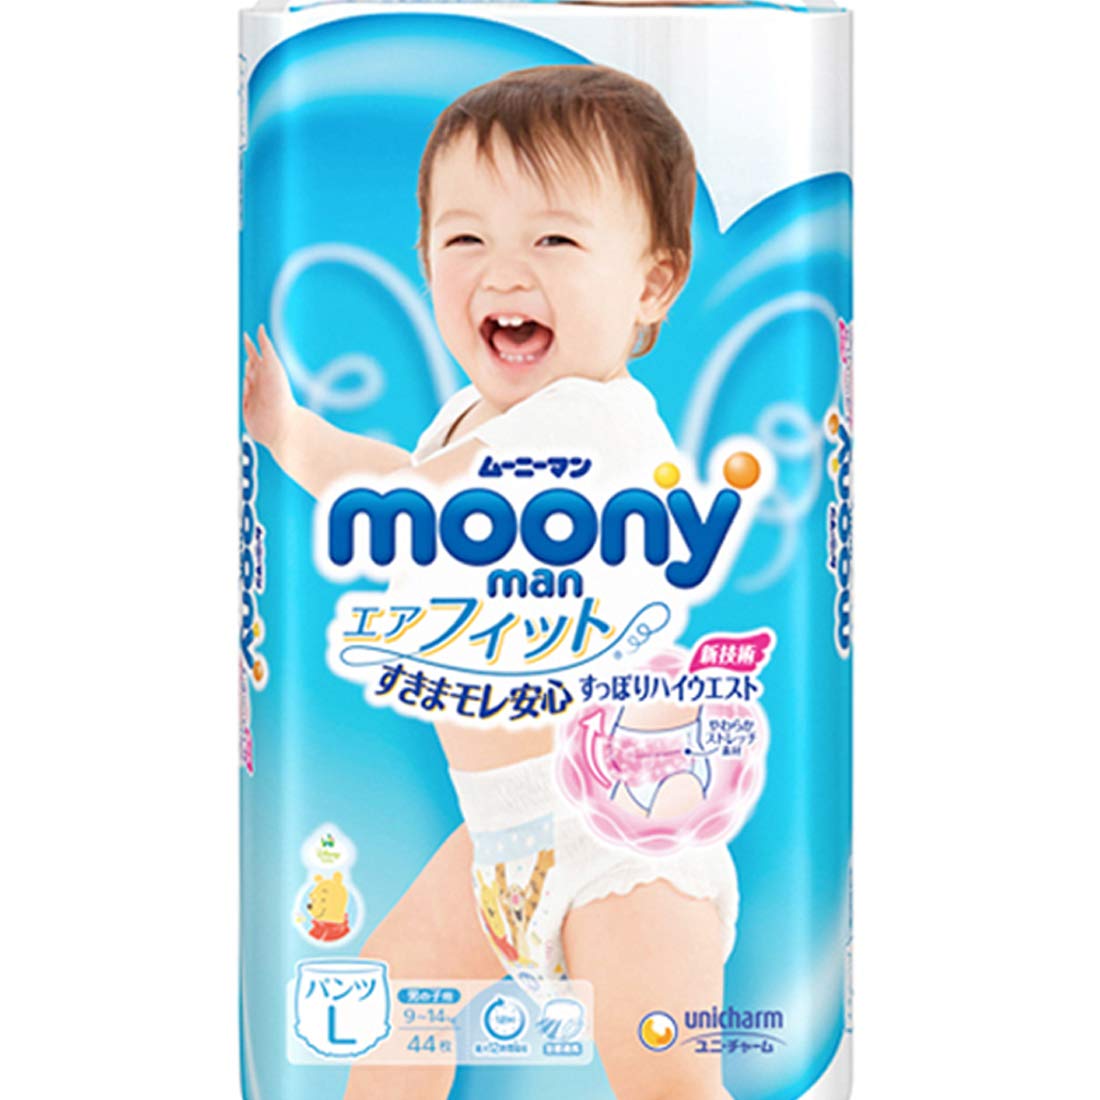 Mooney Premium Soft Organic Cotton Diapers from Japan